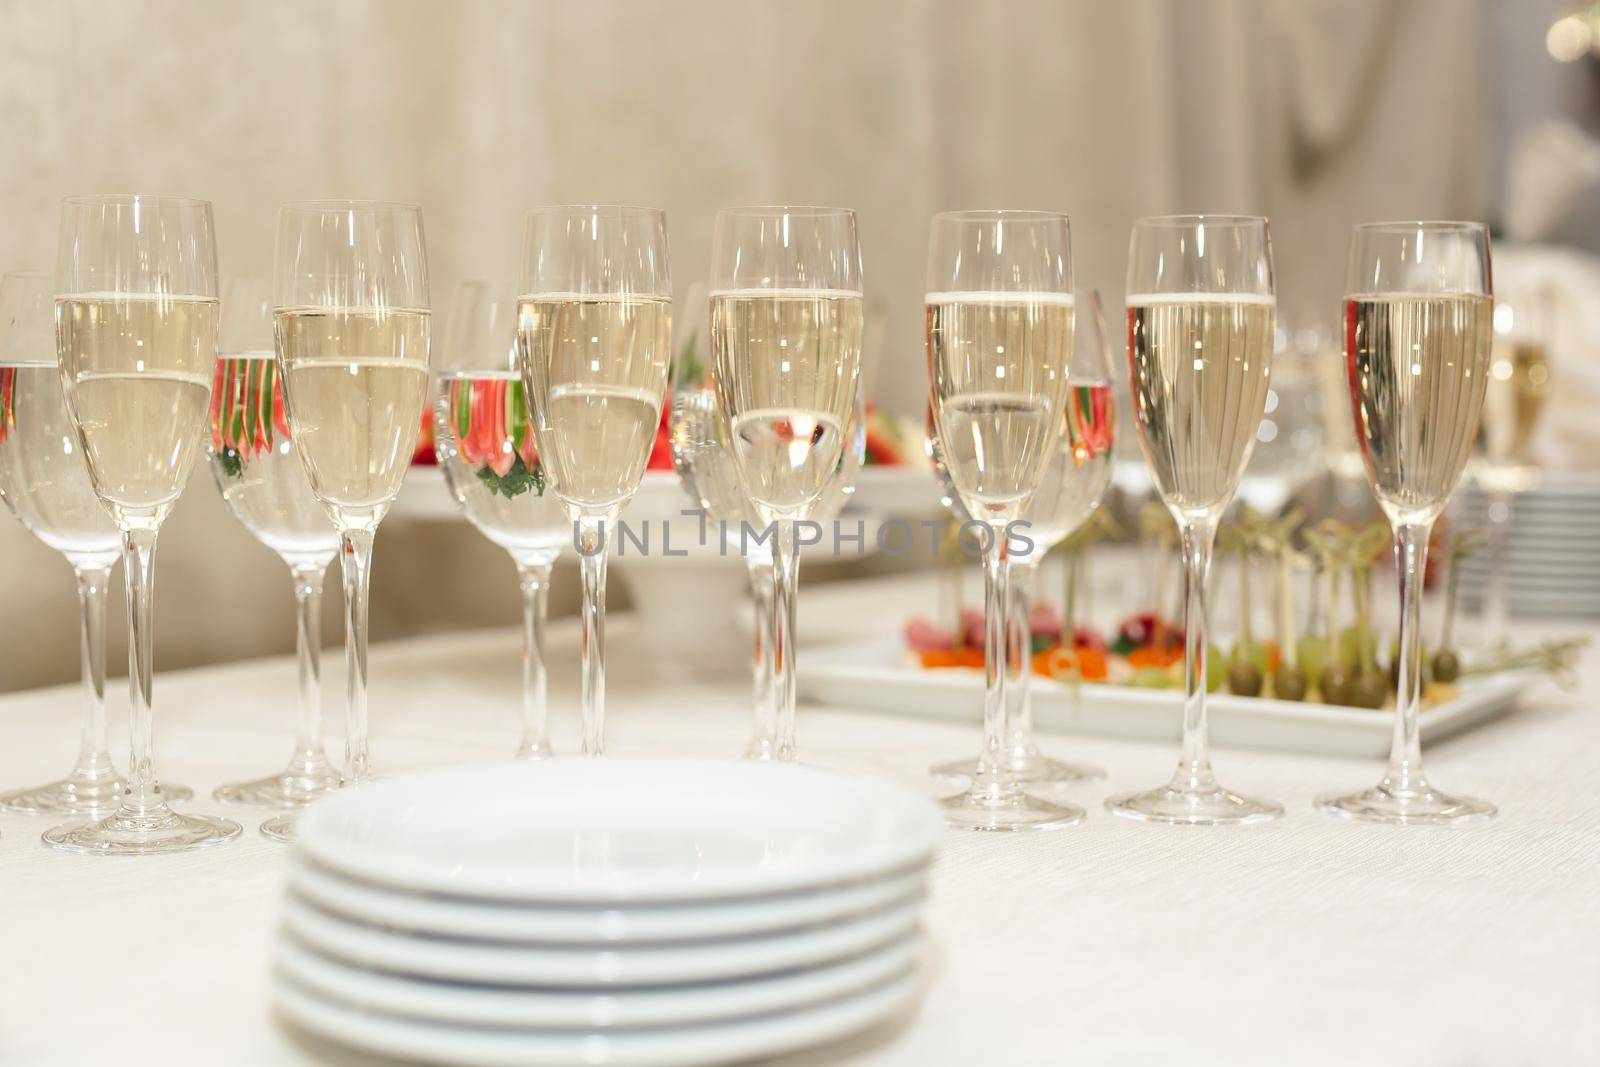 Bride and groom champagne glasses at a wedding reception by StudioPeace